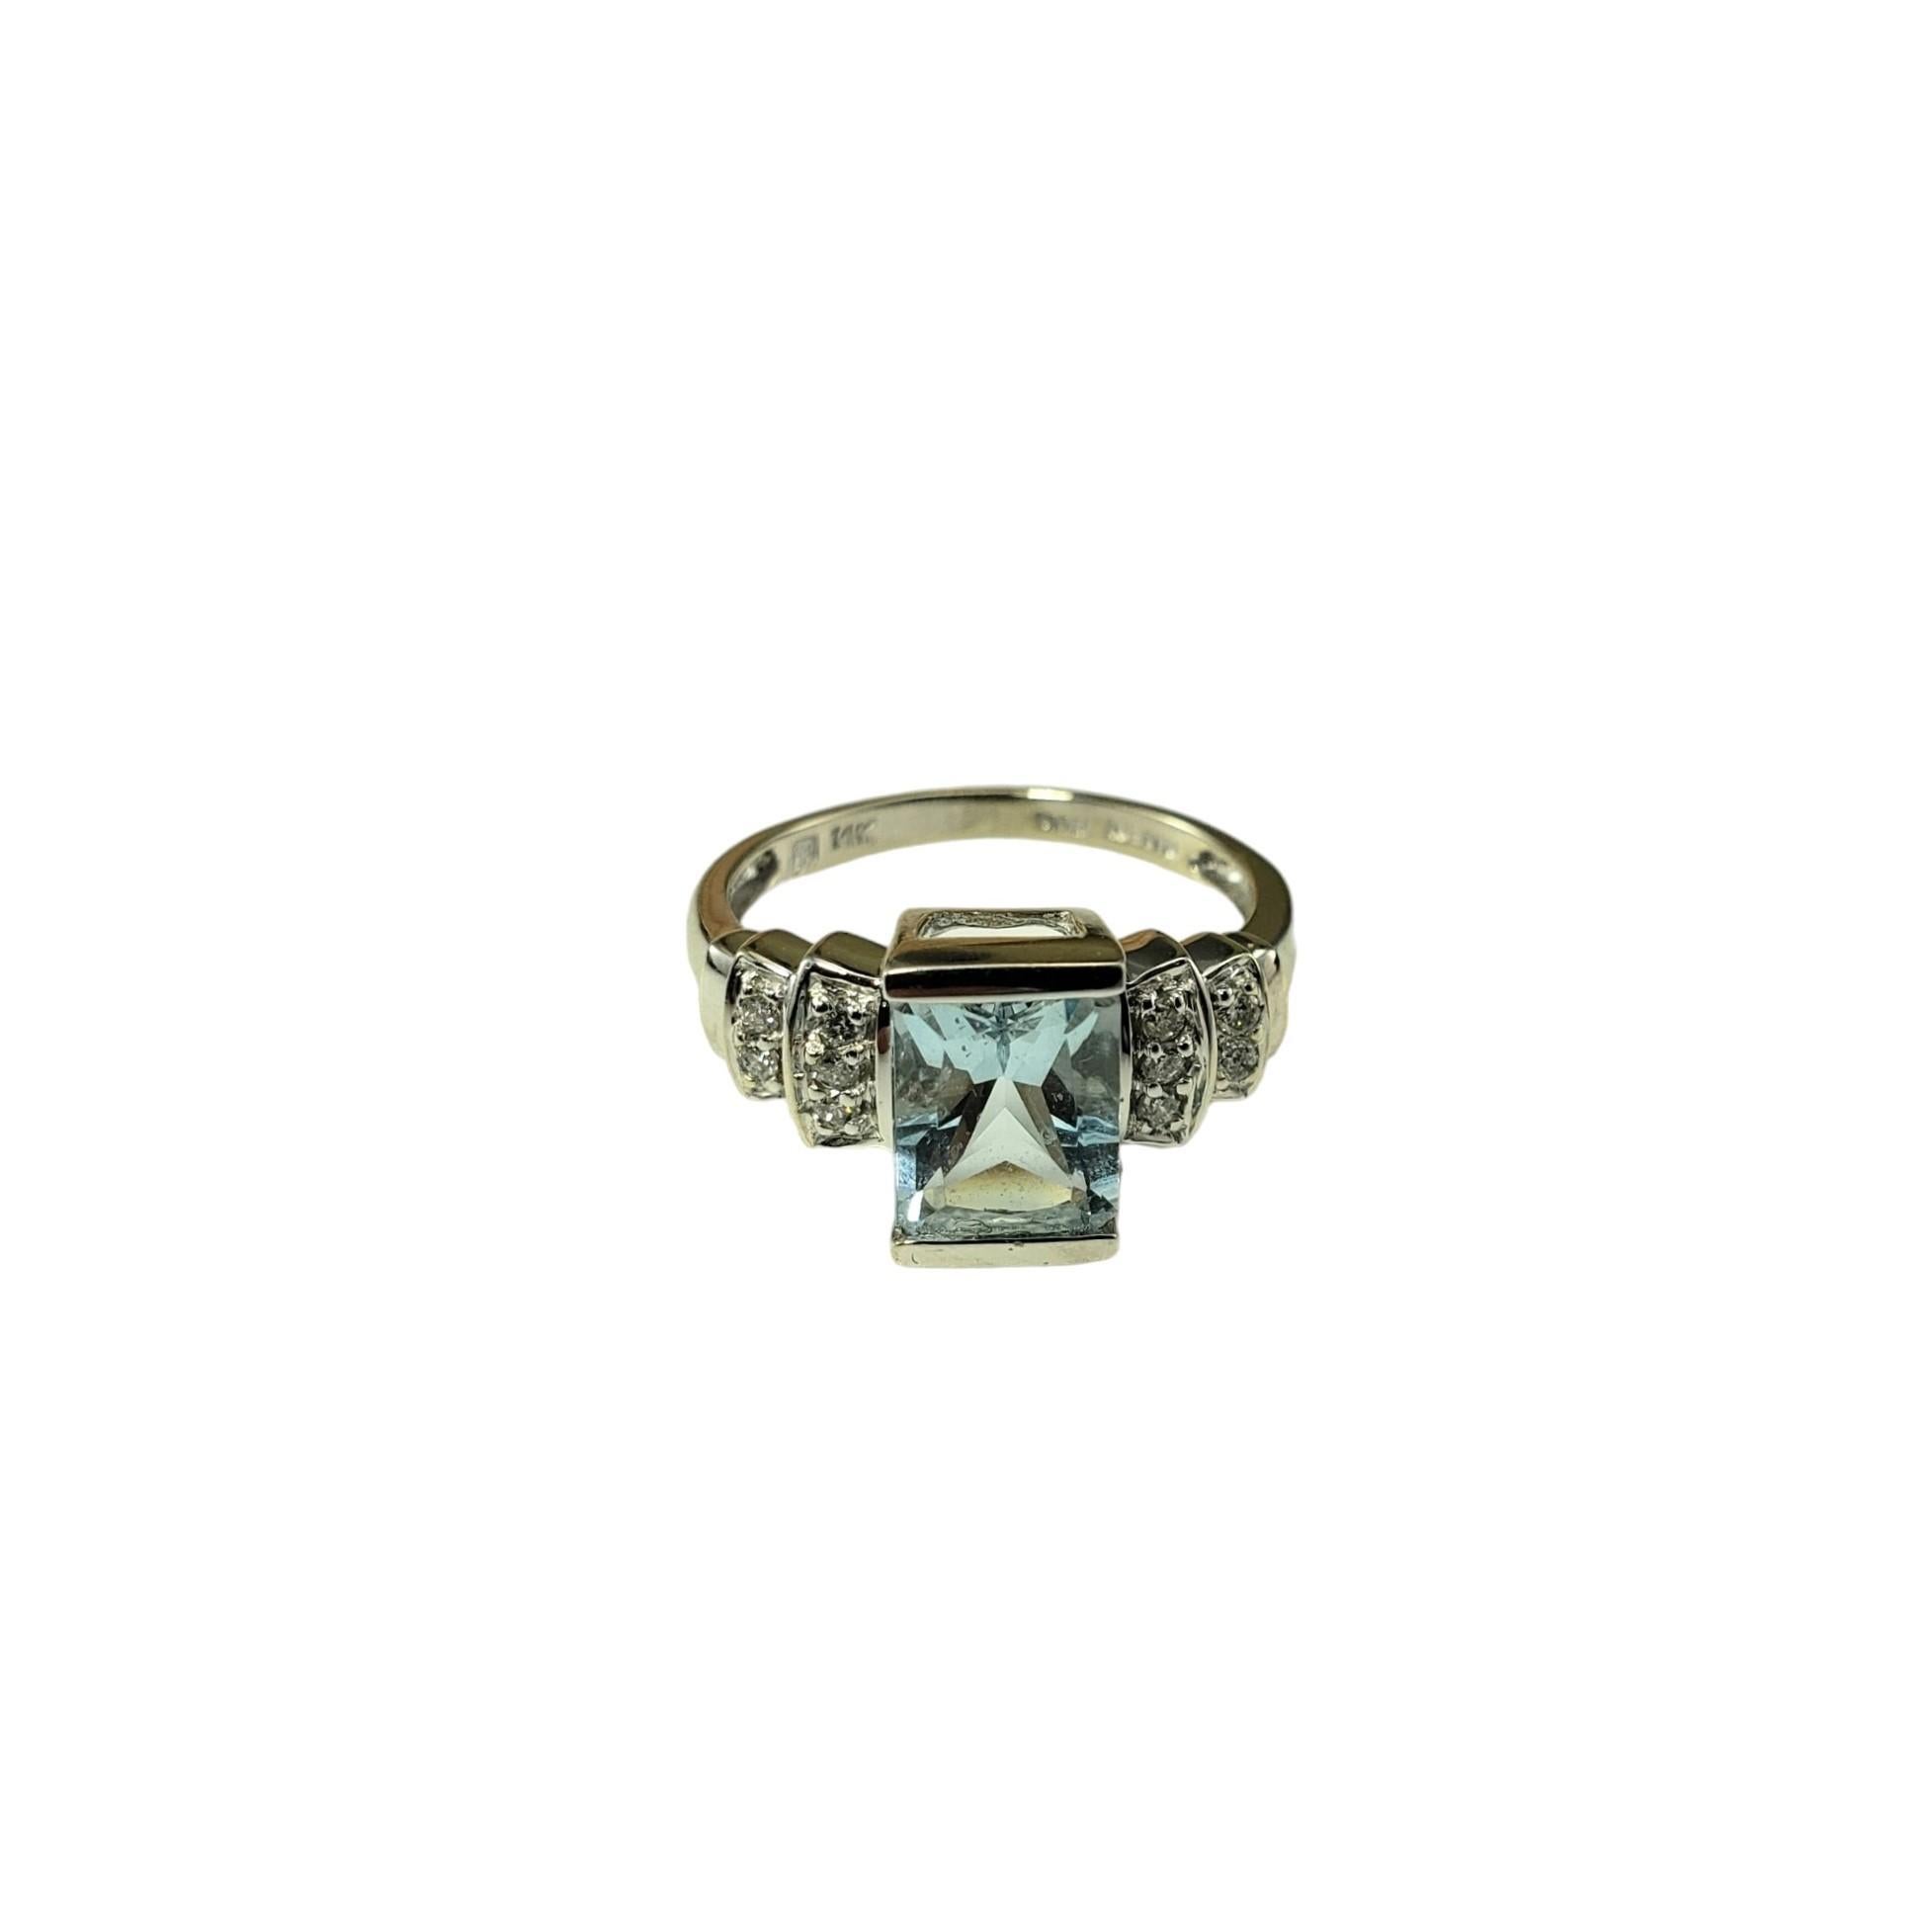 14 Karat White Gold Aquamarine and Diamond Ring Size 5.25

This stunning ring features one emerald cut aquamarine stone (8 mm x 6 mm) and ten round brilliant cut diamonds set in classic 14K white gold.  

Shank: 2 mm.

Approximate total diamond